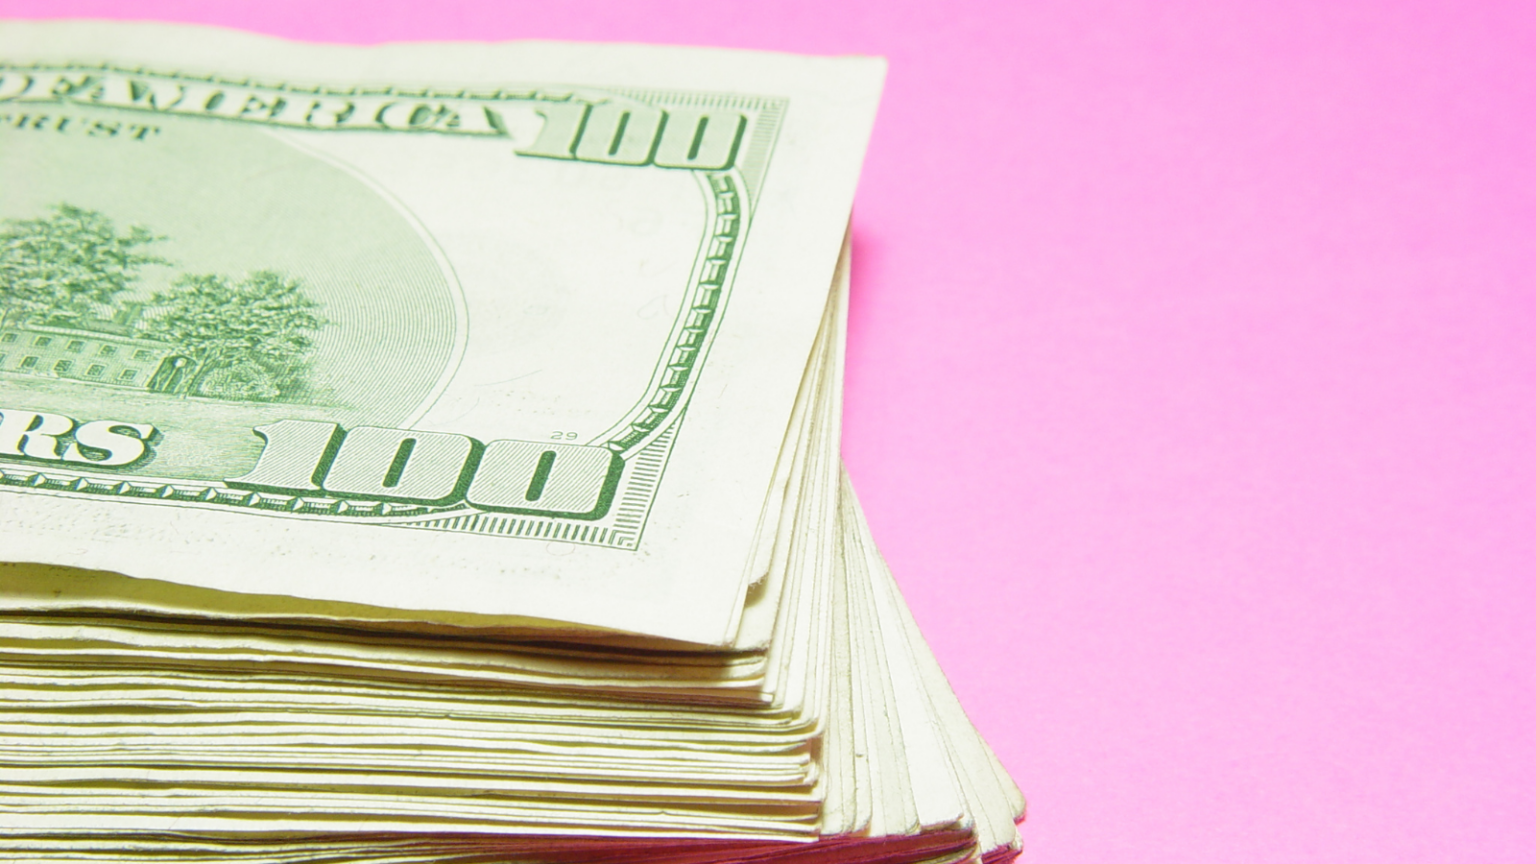 Photo of a stack of $100 bills on a pink background